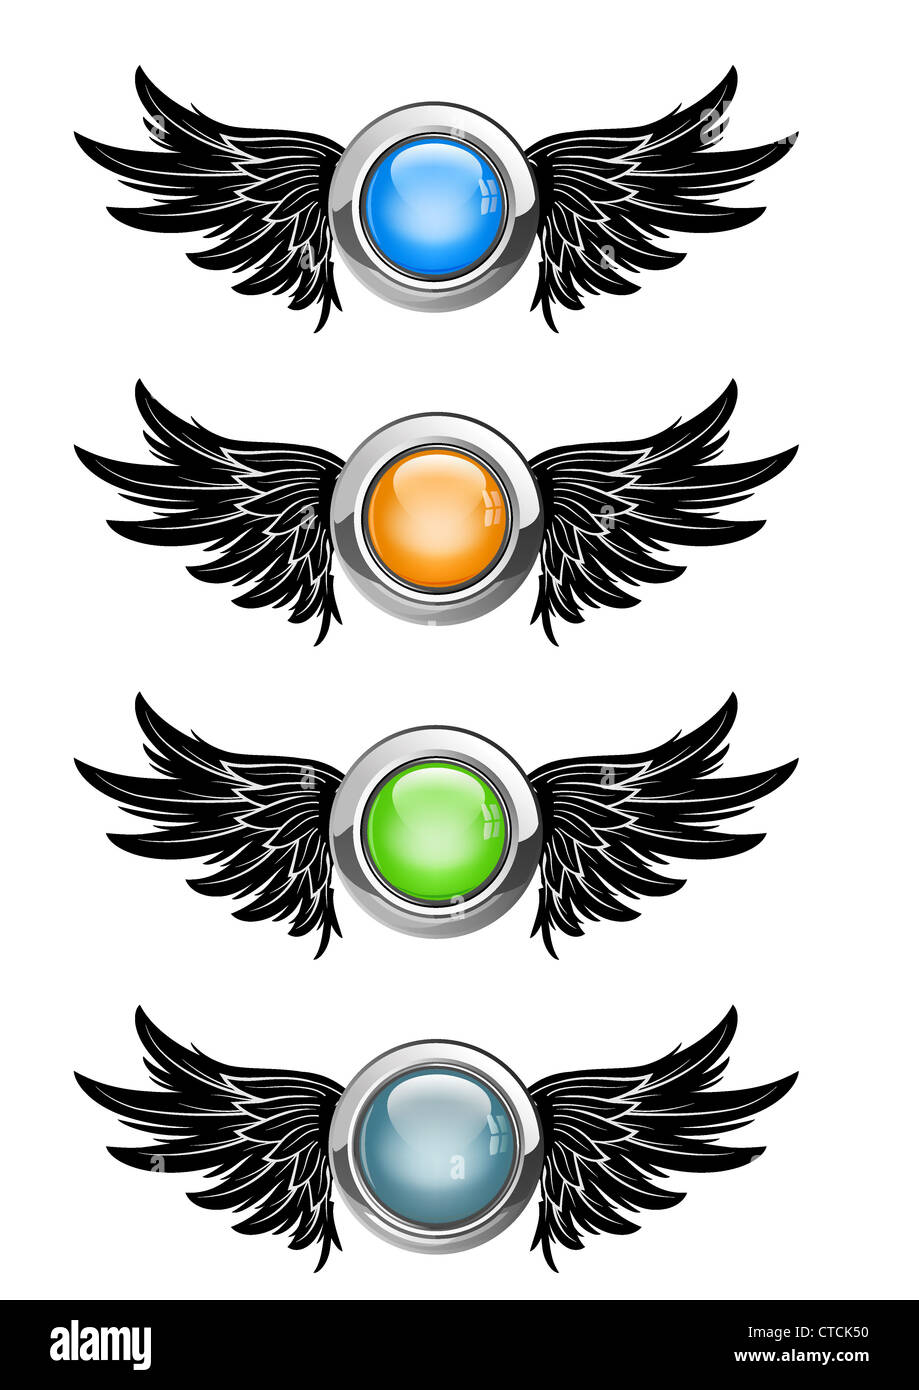 Vector illustration of winged round buttons set Stock Photo